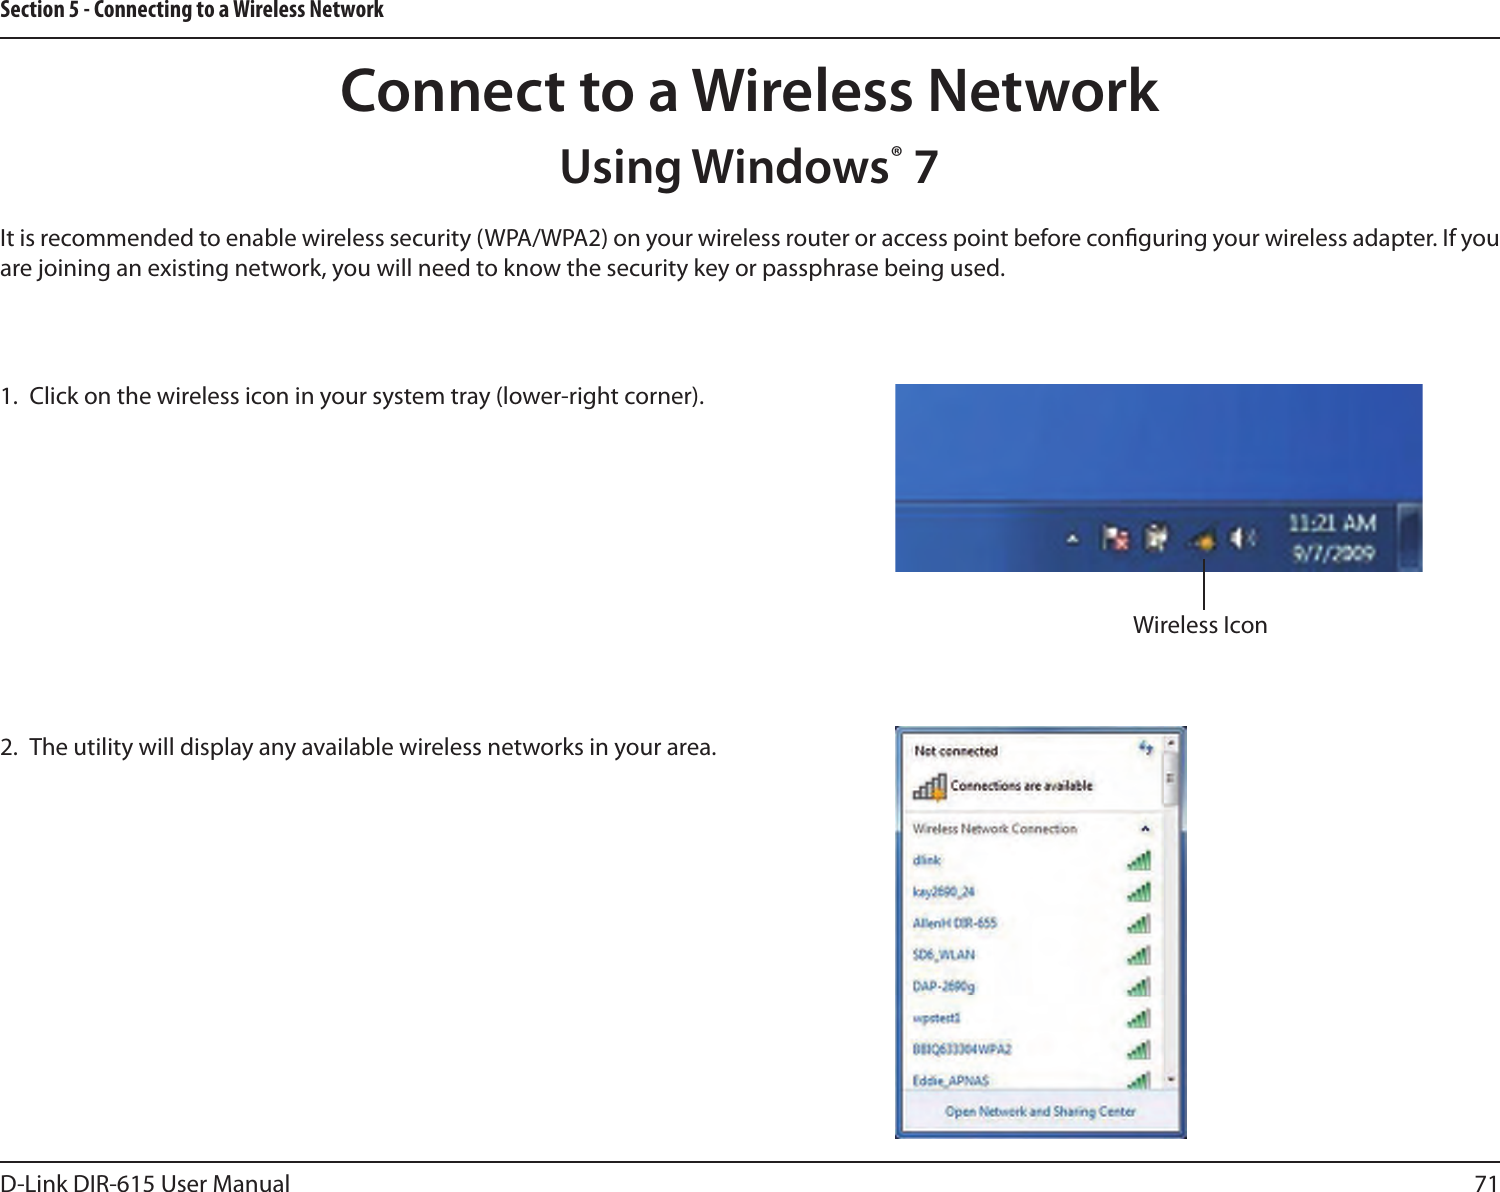 71D-Link DIR-615 User ManualSection 5 - Connecting to a Wireless NetworkUsing Windows® 7It is recommended to enable wireless security (WPA/WPA2) on your wireless router or access point before conguring your wireless adapter. If you are joining an existing network, you will need to know the security key or passphrase being used.1.  Click on the wireless icon in your system tray (lower-right corner).2.  The utility will display any available wireless networks in your area.Connect to a Wireless NetworkWireless Icon